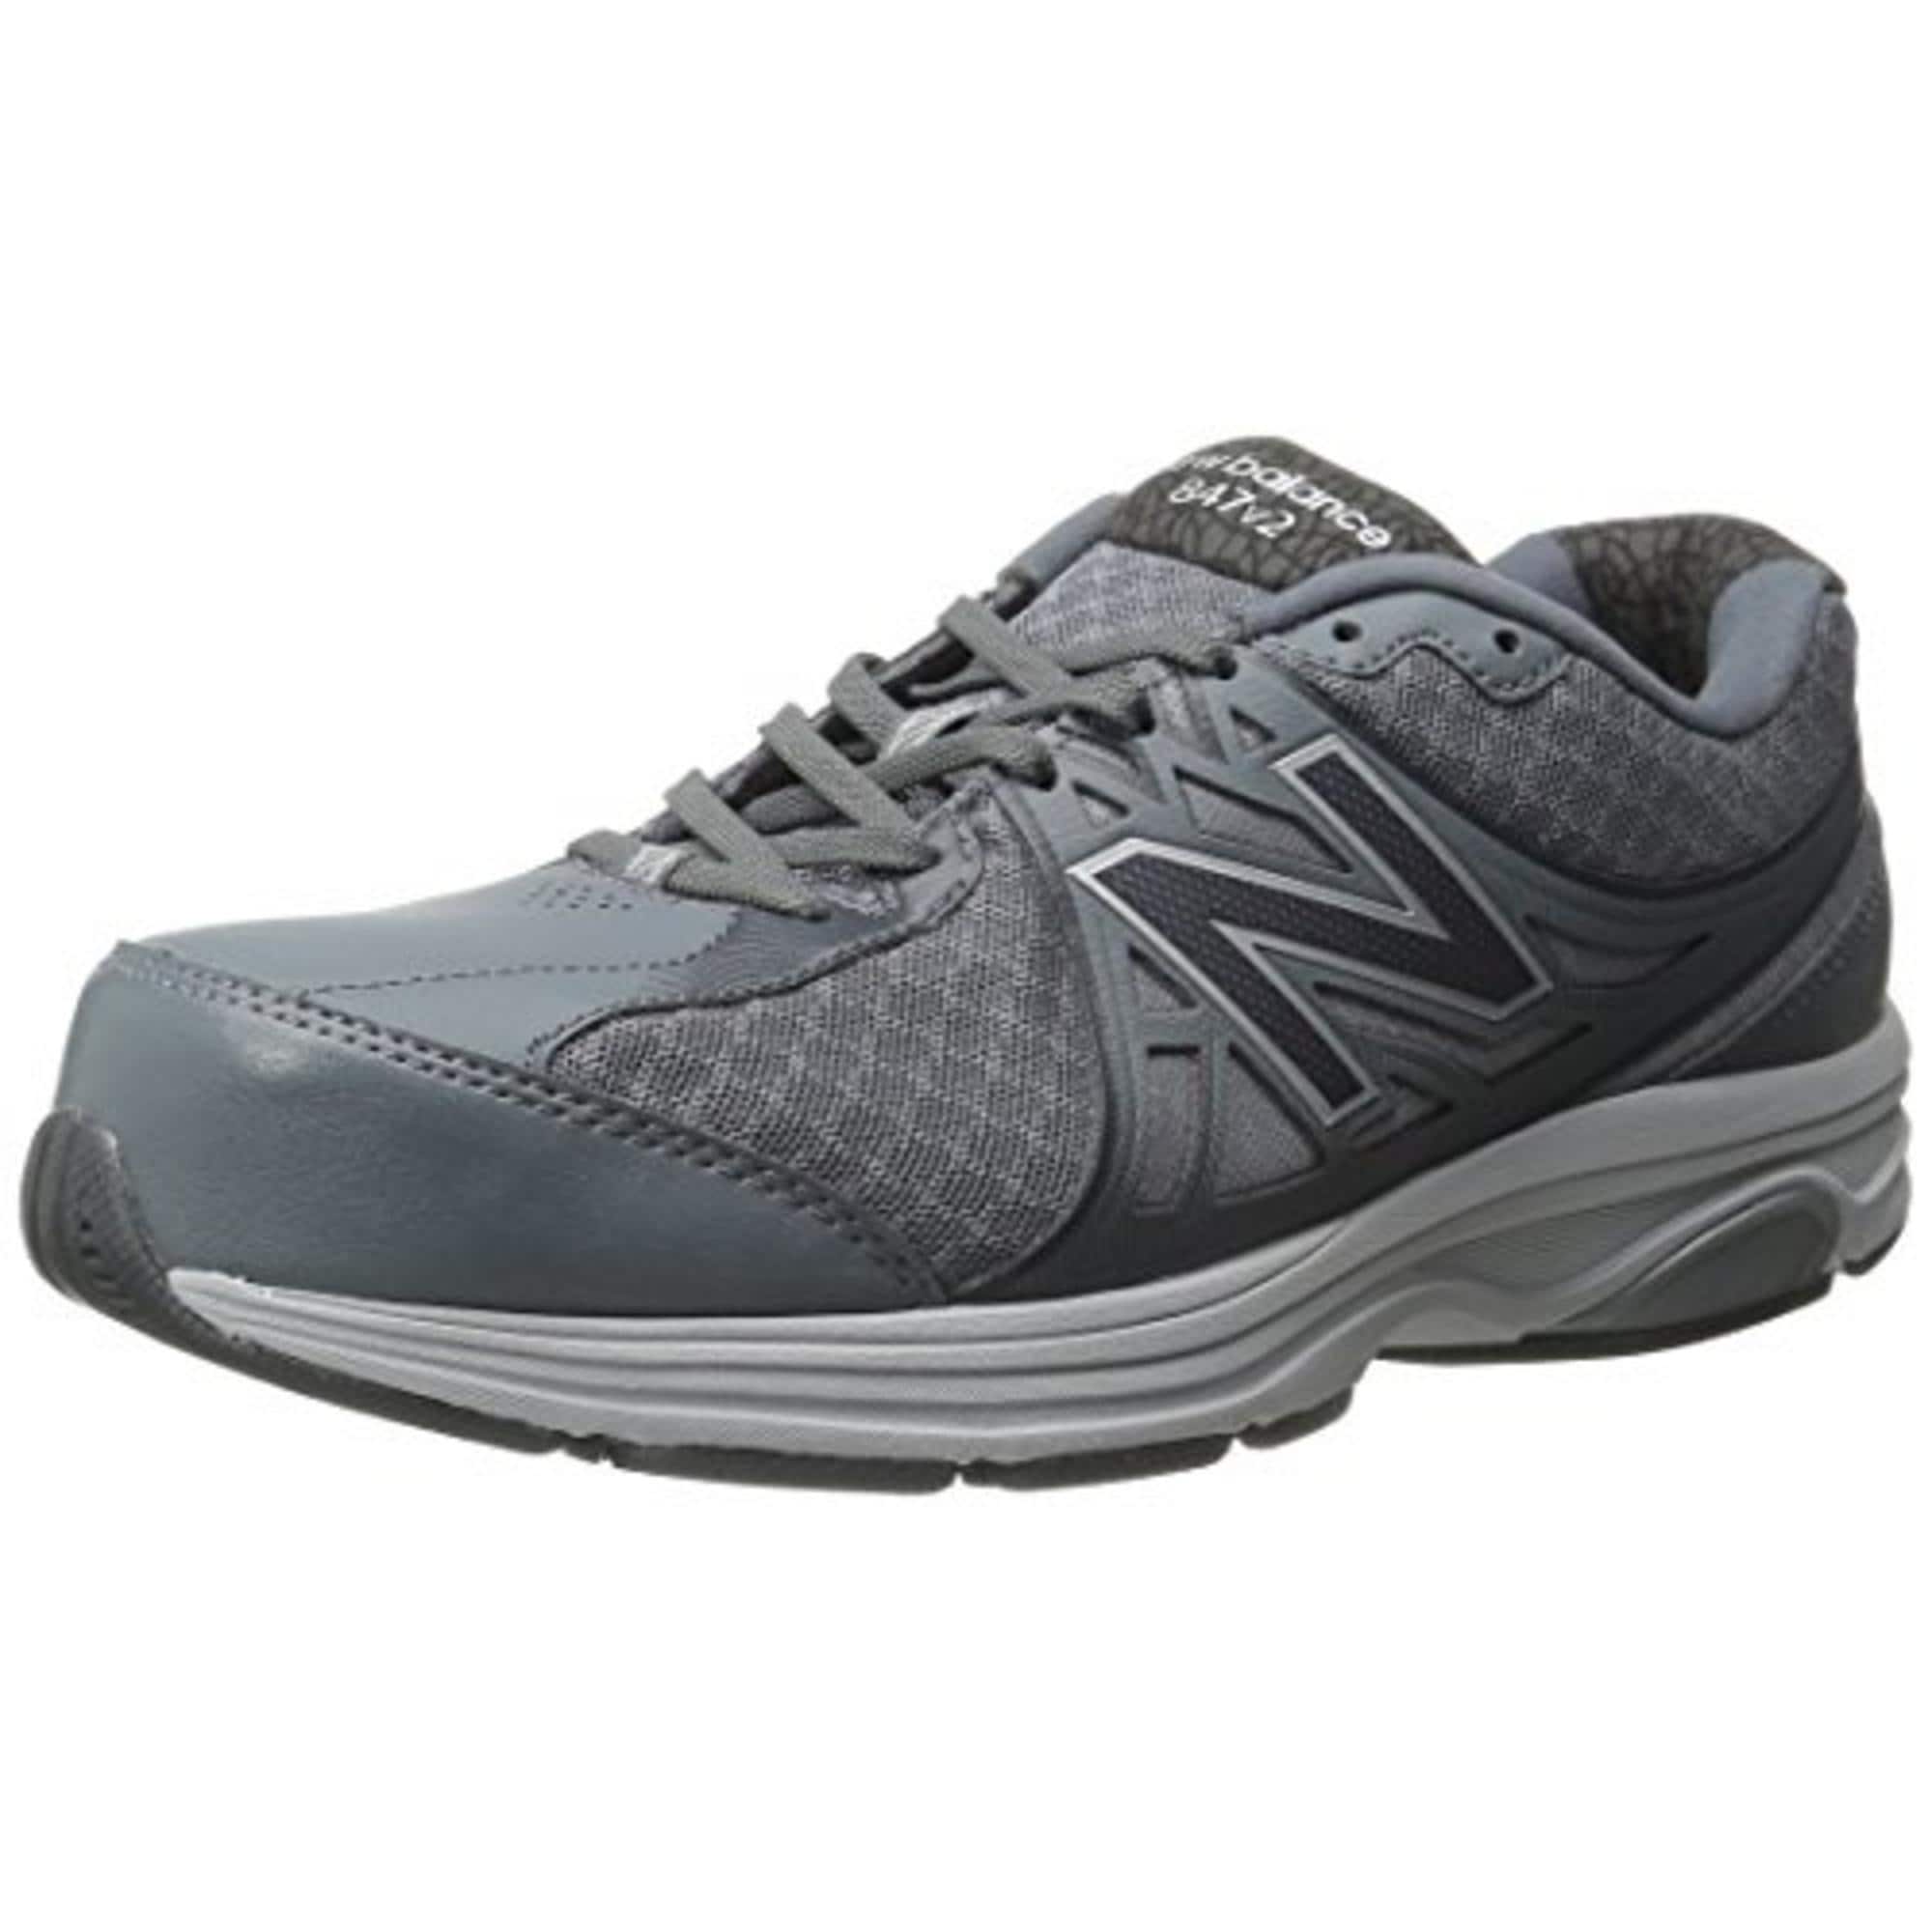 new balance walking shoes with rollbar technology and a wide base